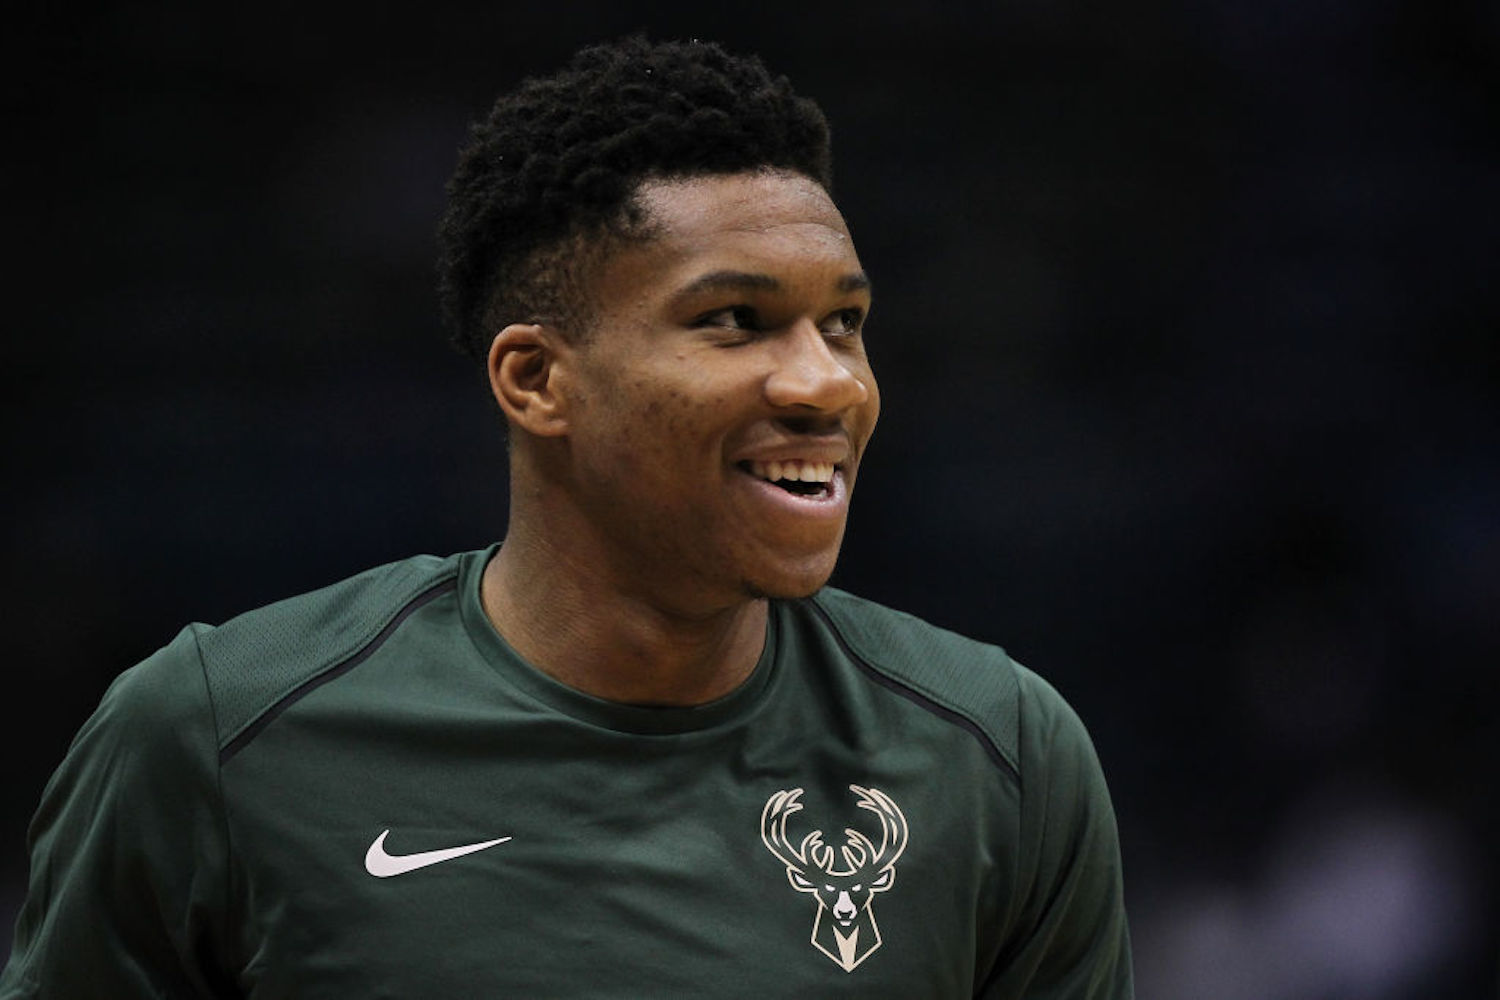 Giannis Antetokounmpo celebrated his 26th birthday over the weekend, and his teammates gave him a not-so-subtle gift.